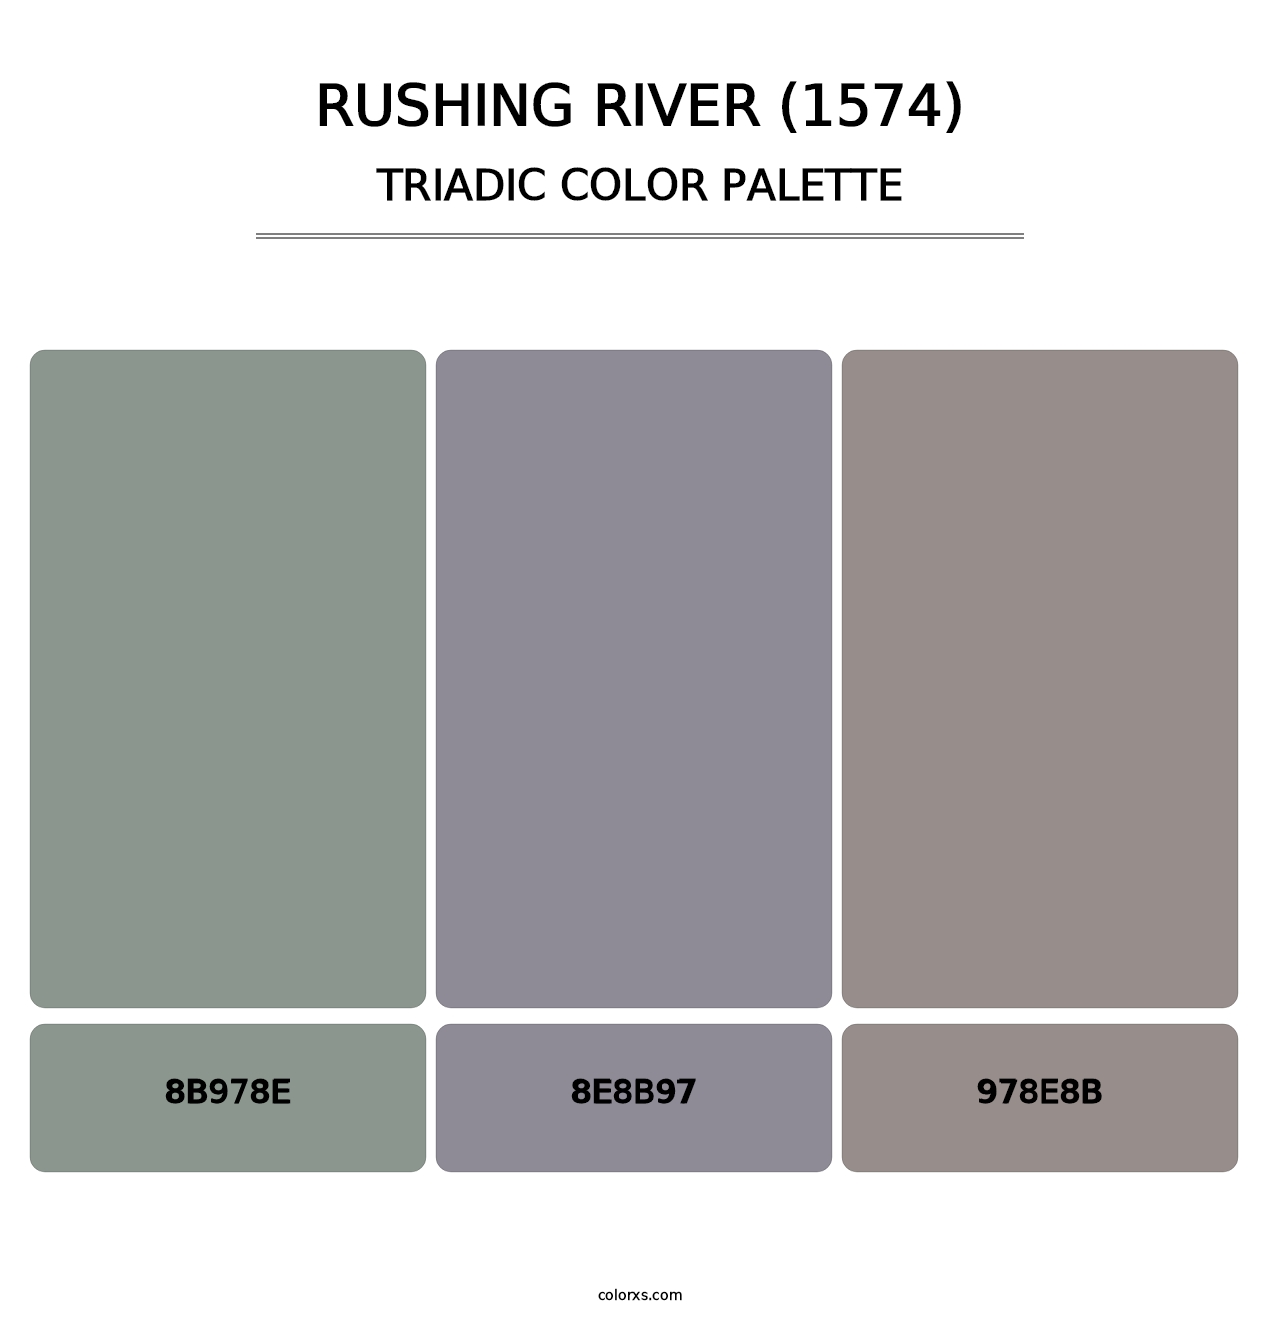 Rushing River (1574) - Triadic Color Palette